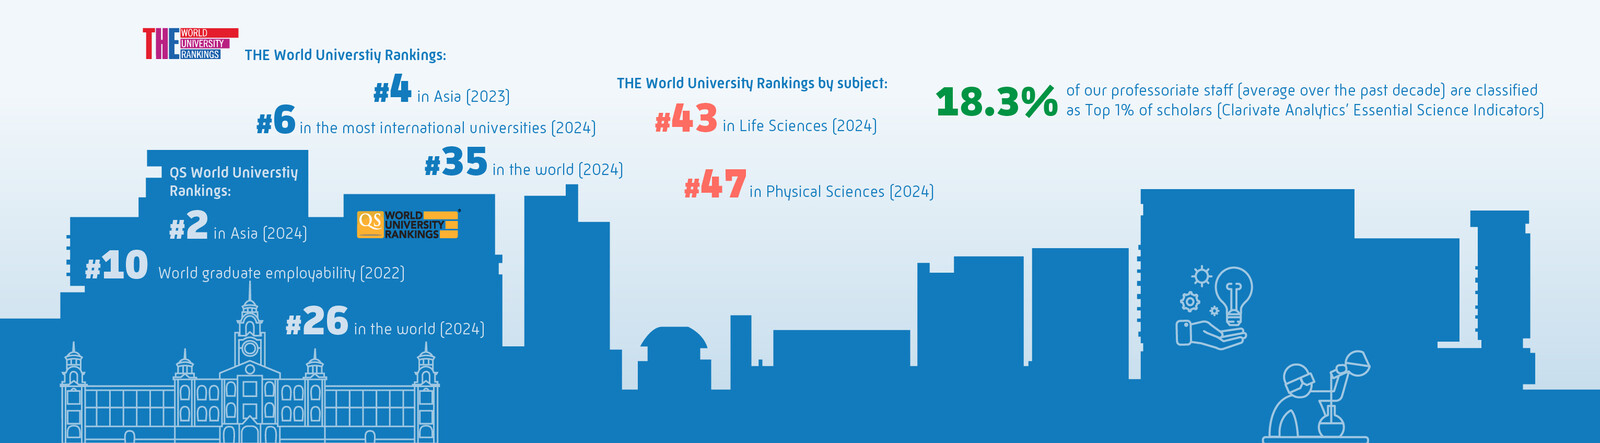 University Rankings - THE World University Rankings: #4 in Asia (2023), #35 in the world (2024), #6 in the most international universities (2024); #43 in Life Sciences (2024); #47 in Physical Sciences (2024); QS World University Rankings: #2 in Asia (2024), #10 World graduate employability (2022), #26 in the world (2024). Top-notch Scholars - 18.3% of professoriate staff average over the past decade) are the world’s Top 1% scholars (Clarivate Analytics’ Essential Science Indicators)